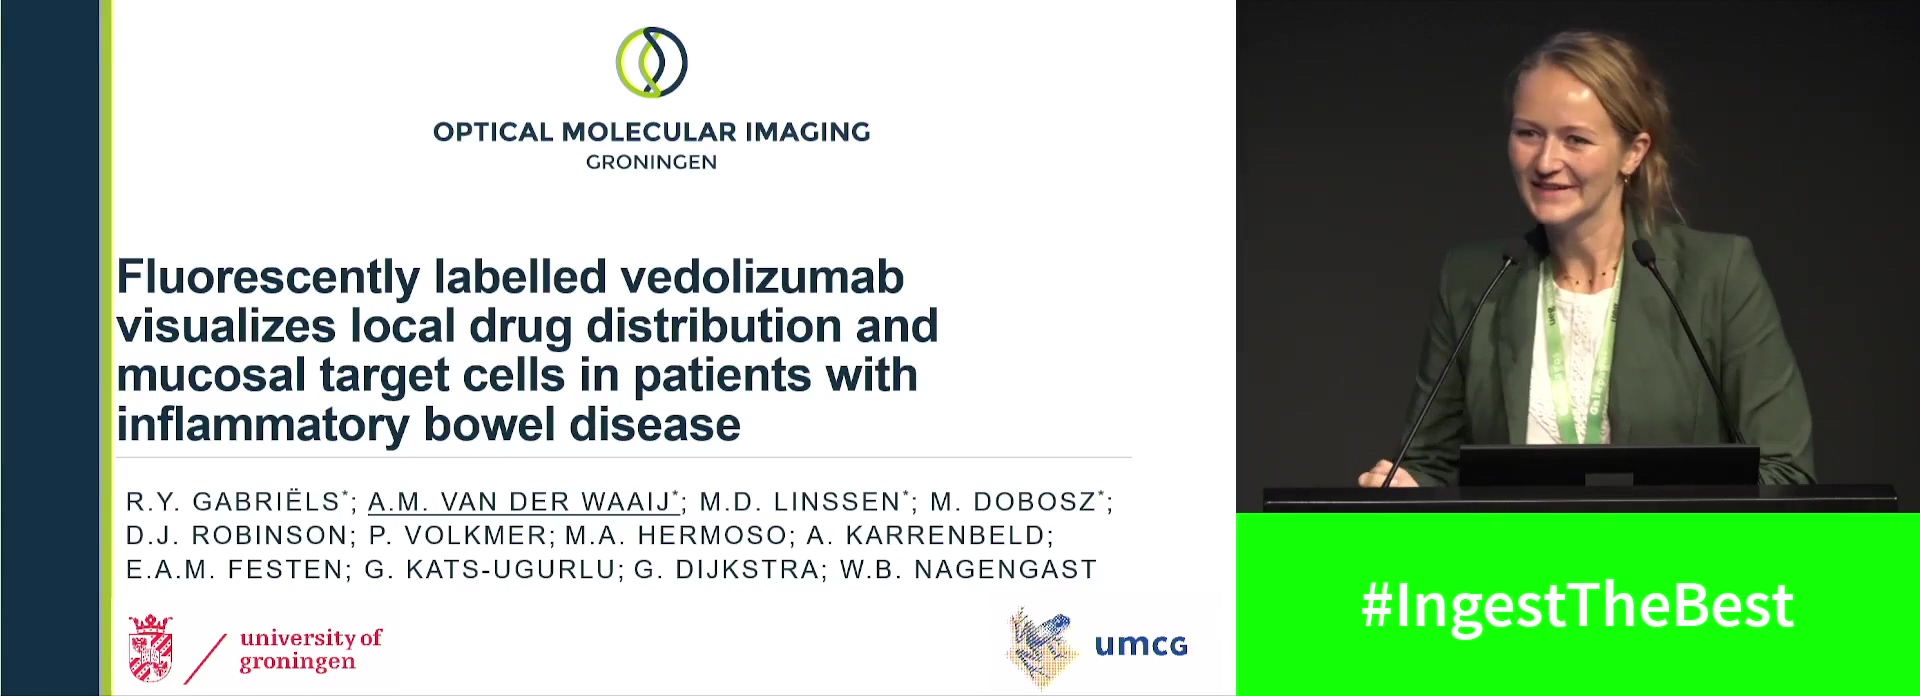 FLUORESCENTLY LABELLED VEDOLIZUMAB VISUALIZES LOCAL DRUG DISTRIBUTION DURING COLONOSCOPY AND IDENTIFIES MUCOSAL TARGET CELLS IN PATIENTS WITH INFLAMMATORY BOWEL DISEASE